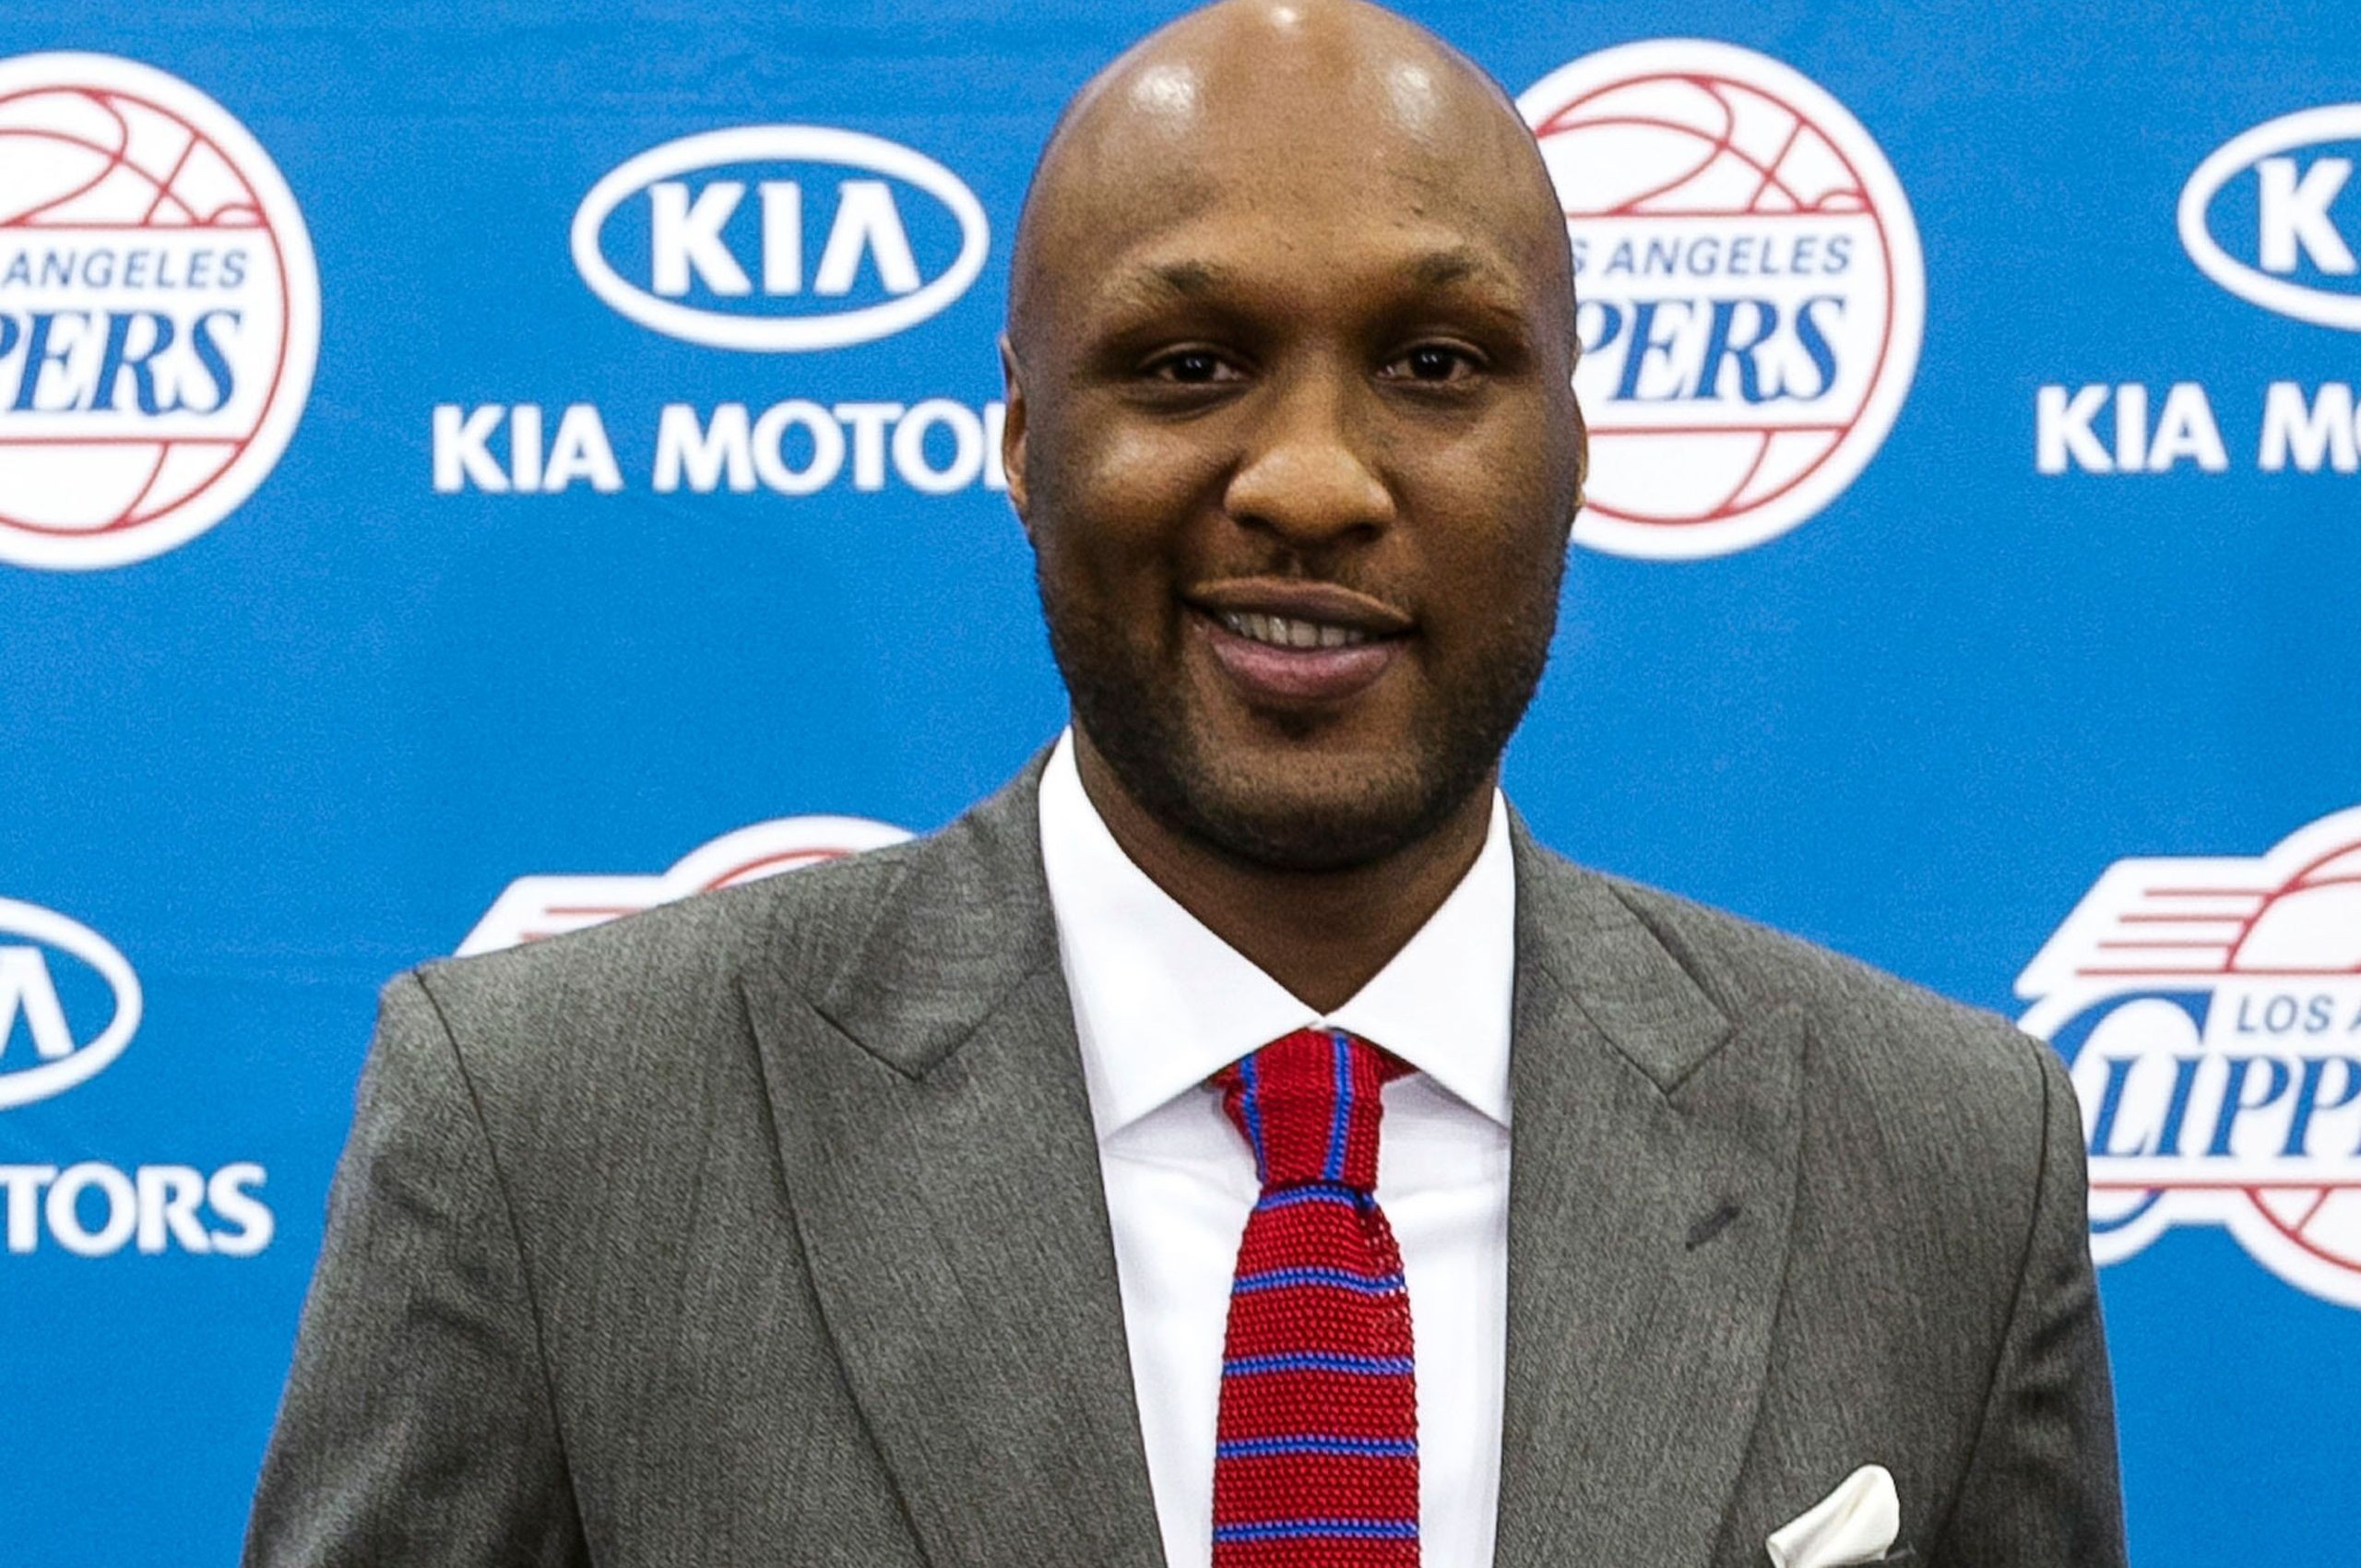 Los Angeles Clippers Nba American Professional Basketball Lamar Odom